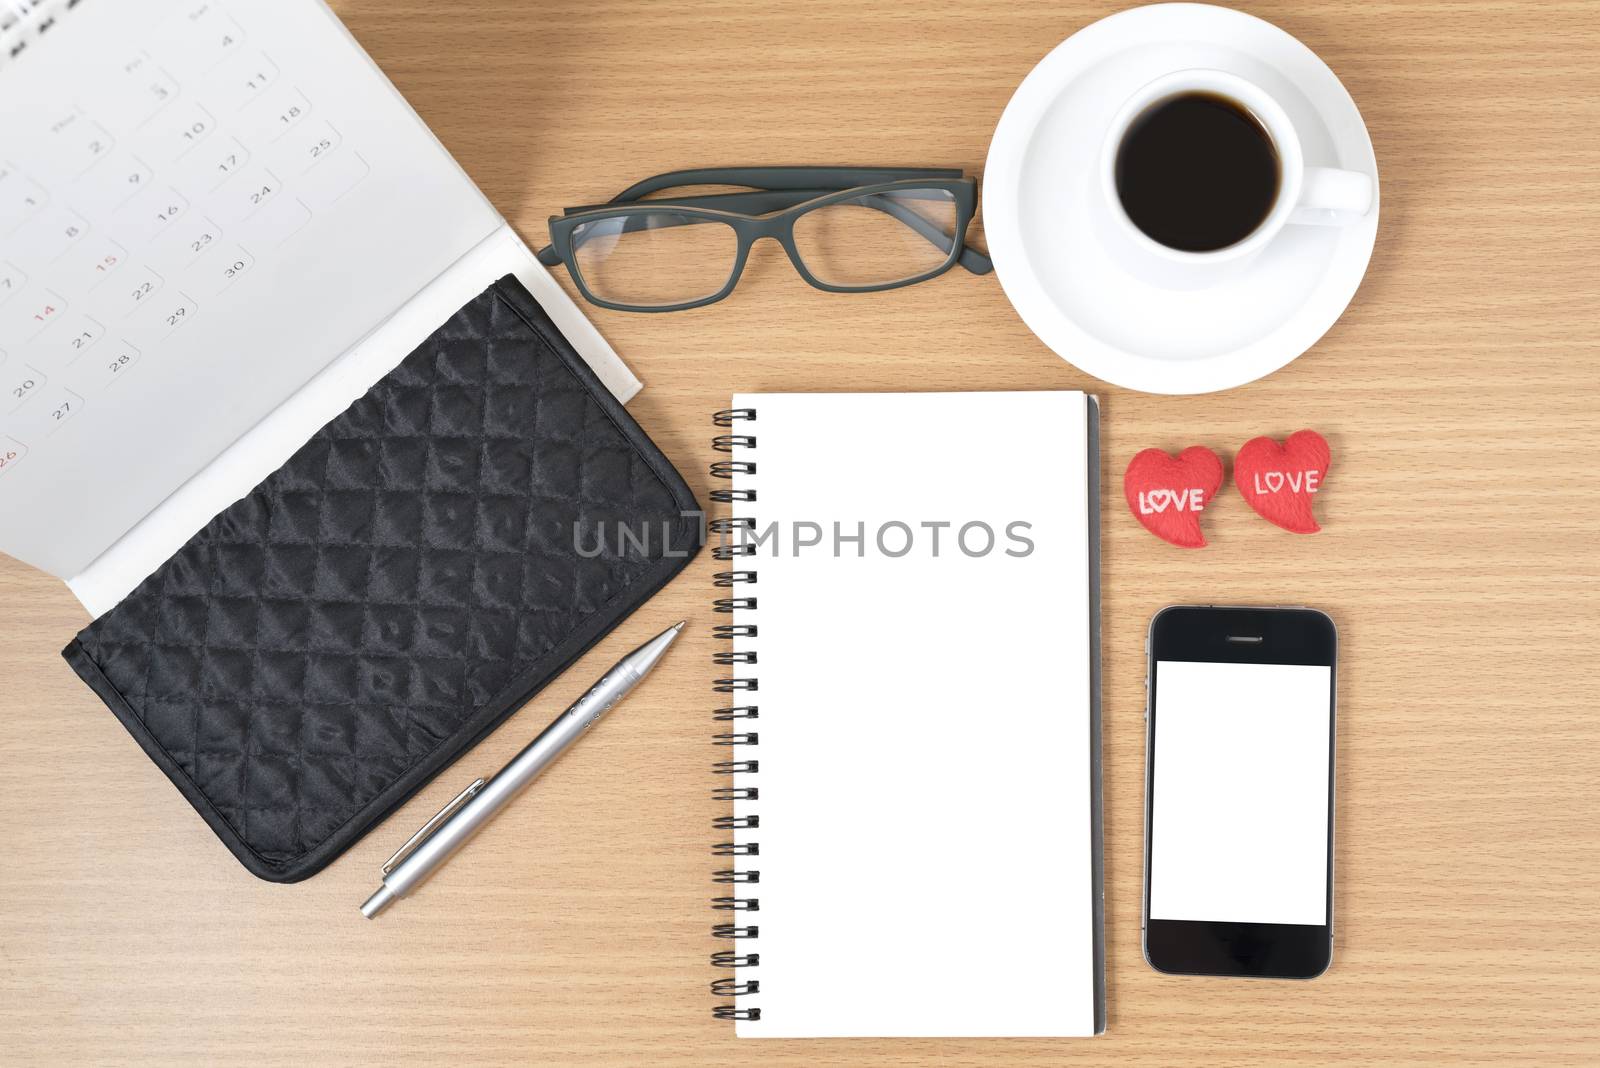 office desk : coffee with phone,wallet,calendar,heart,notepad,eyeglasses,heart on wood background